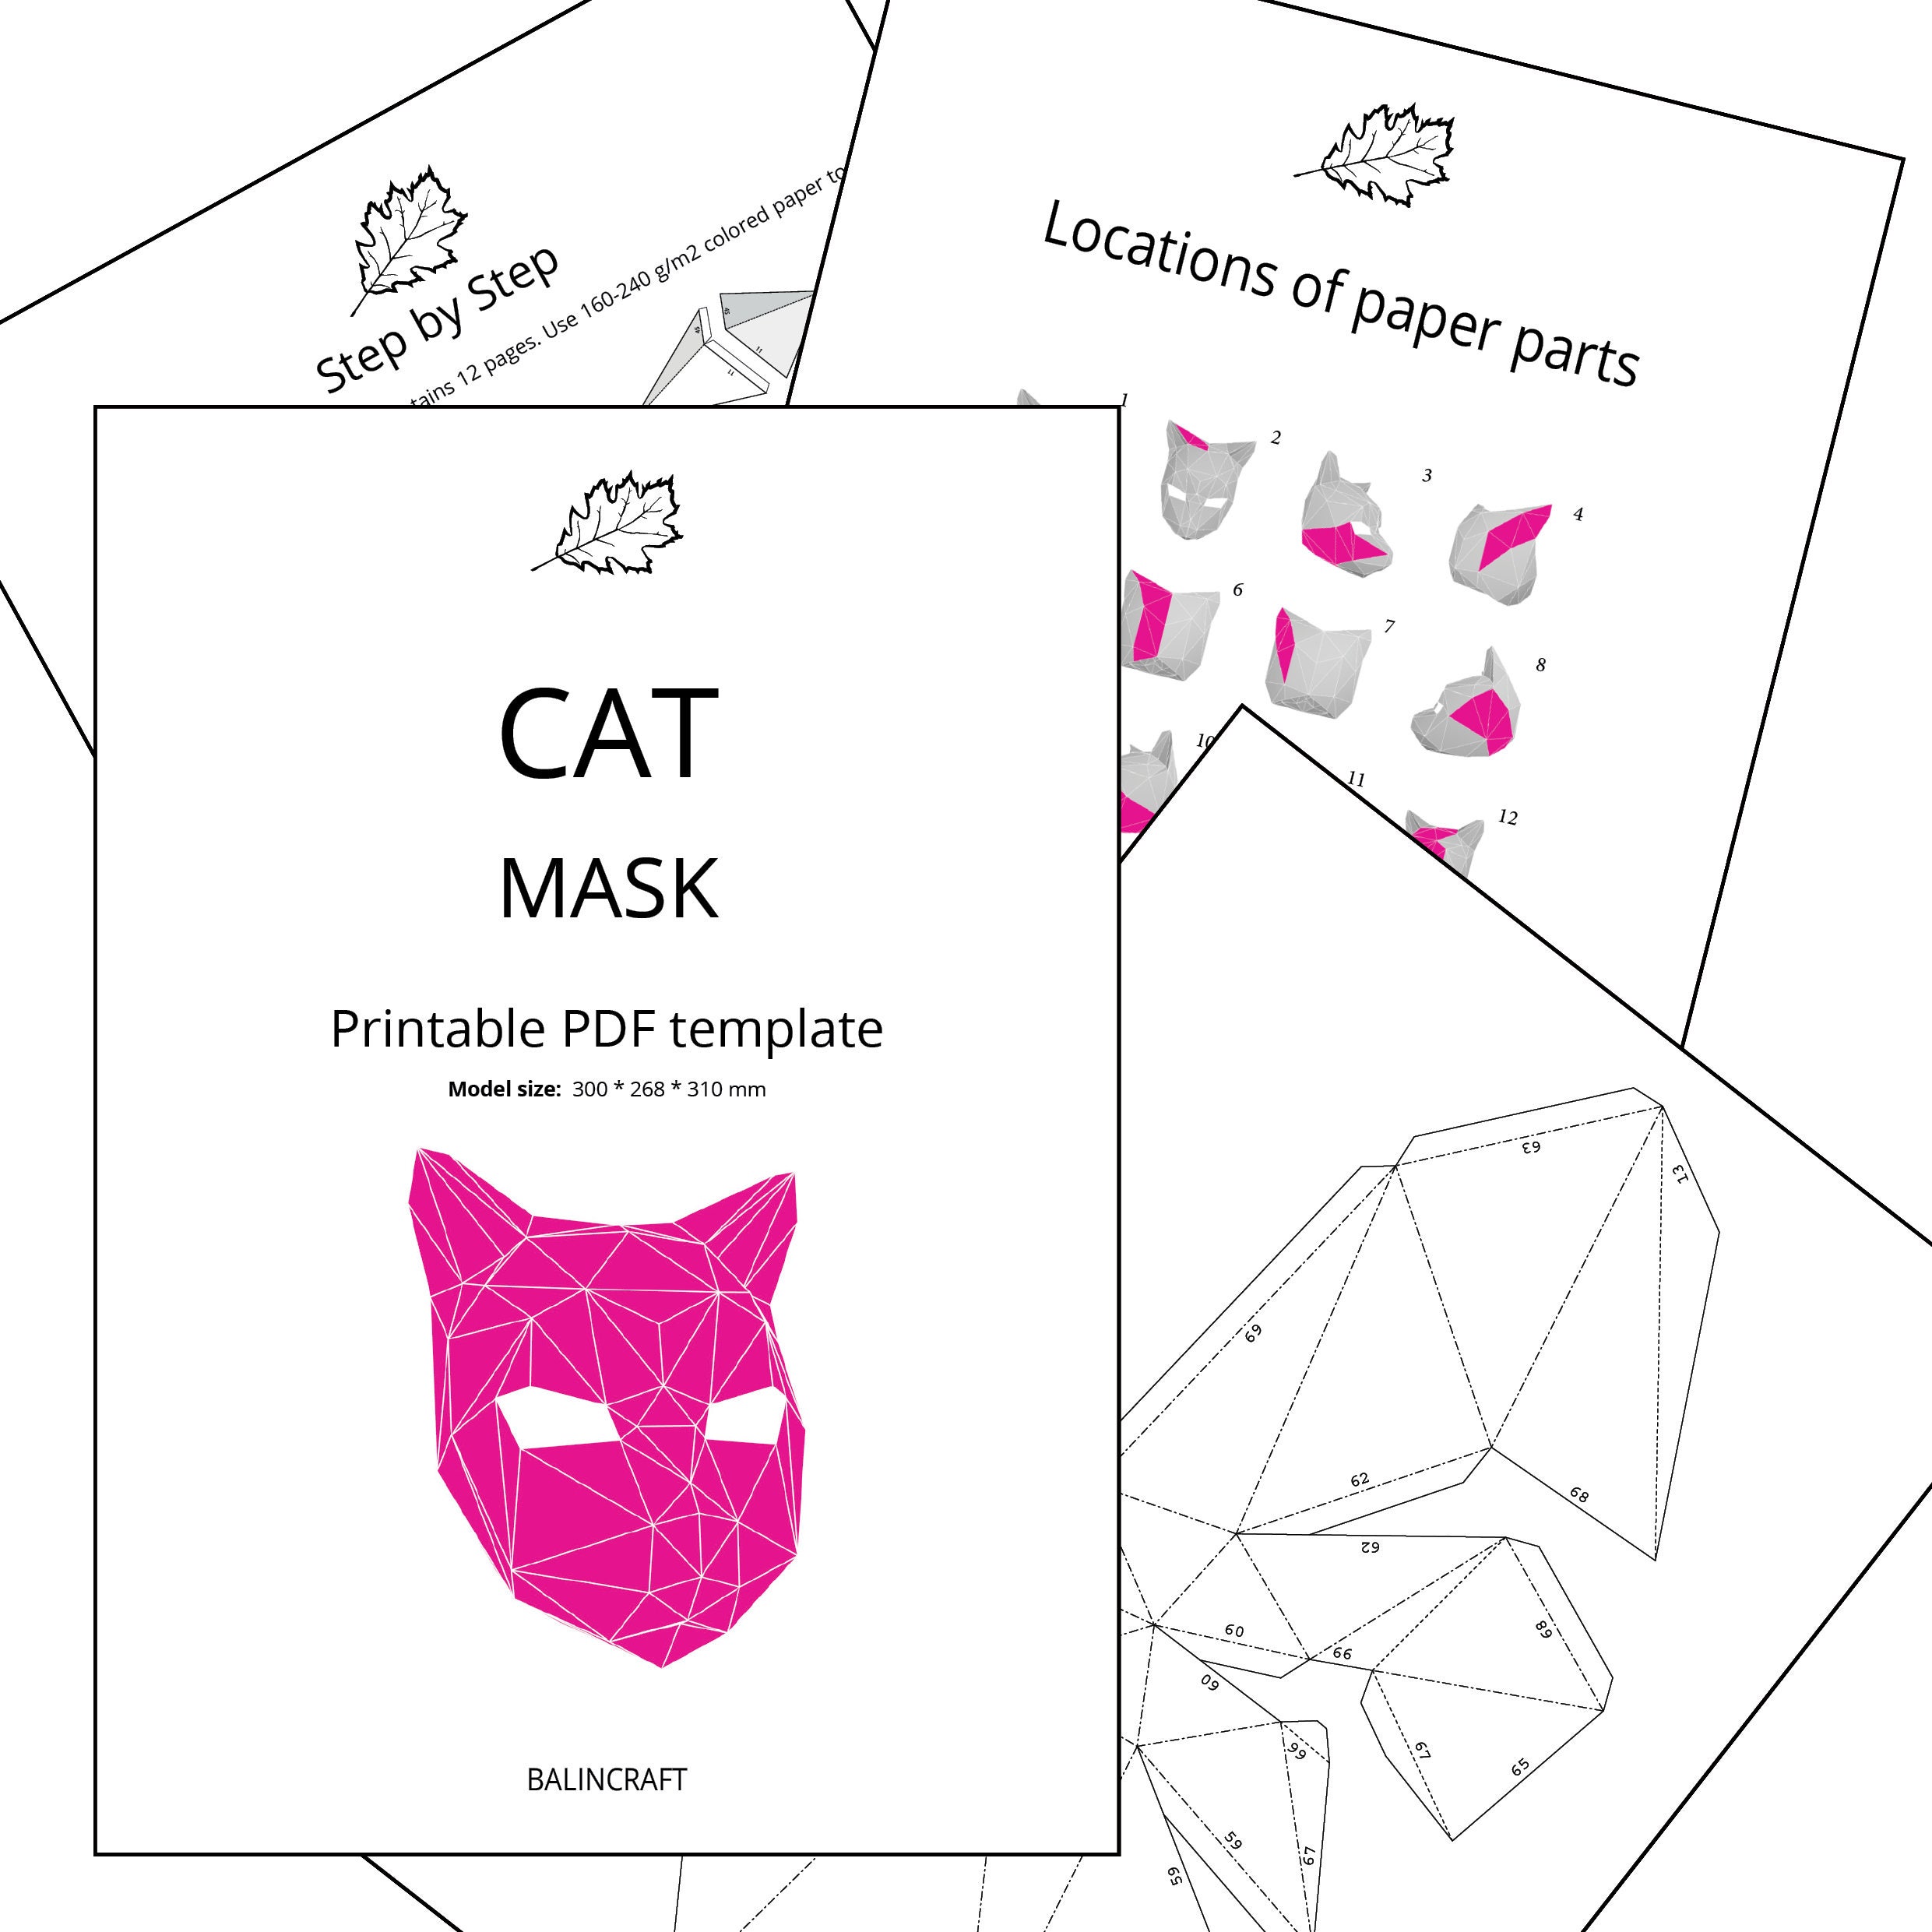 Siberian Cat mask PDF template for assembly from paper - LACRAFTA